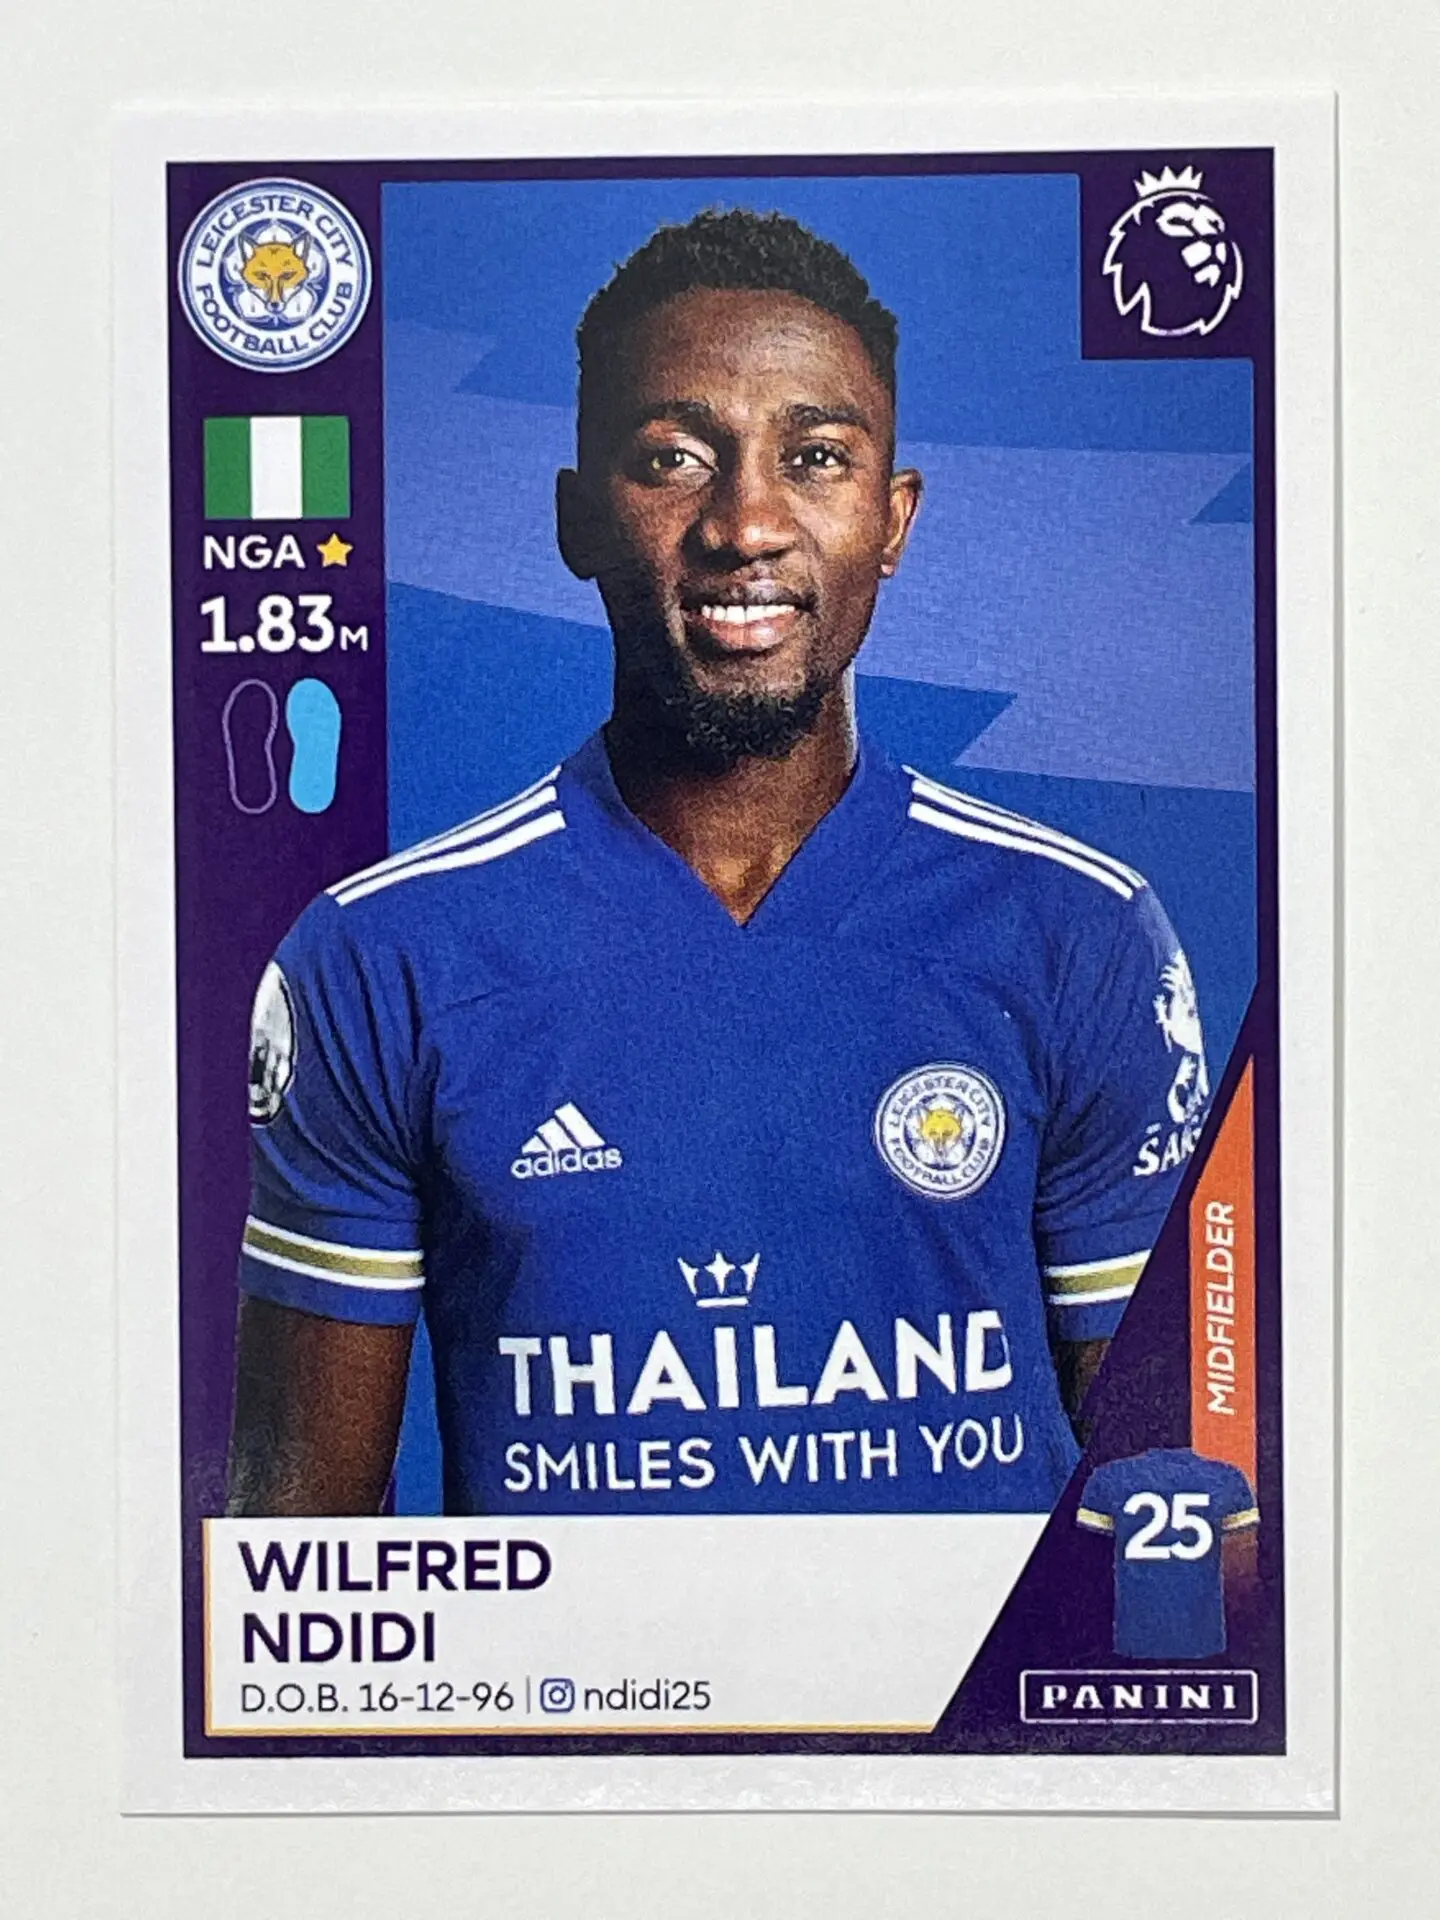 2016 Topps Premier League Wilfred Ndidi /100 42 Leicester RC Rookie ディディ　100枚限定　レスター ルーキー